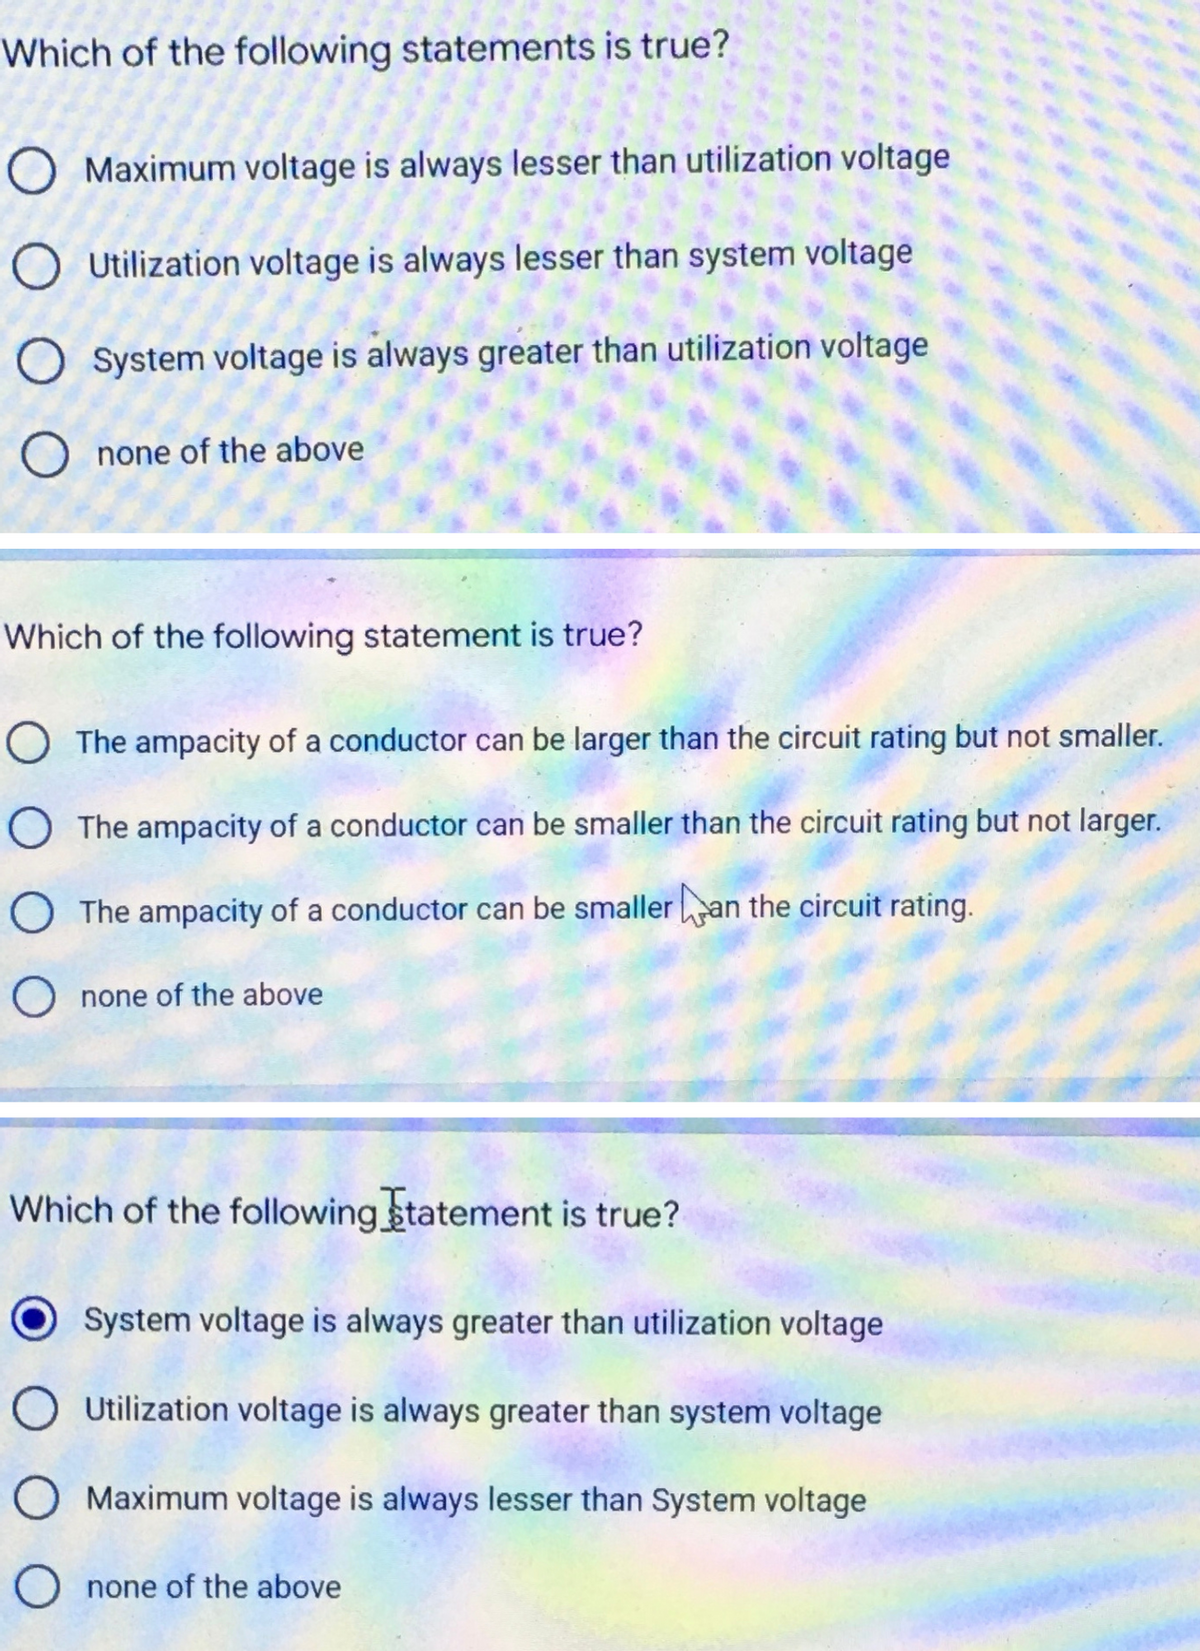 Which of the following statements is true?
O Maximum voltage is always lesser than utilization voltage
Utilization voltage is always lesser than system voltage
O System voltage is always greater than utilization voltage
O none of the above
Which of the following statement is true?
O The ampacity of a conductor can be larger than the circuit rating but not smaller.
The ampacity of a conductor can be smaller than the circuit rating but not larger.
The ampacity of a conductor can be smaller an the circuit rating.
O none of the above
Which of the following statement is true?
System voltage is always greater than utilization voltage
O Utilization voltage is always greater than system voltage
Maximum voltage is always lesser than System voltage
O none of the above
